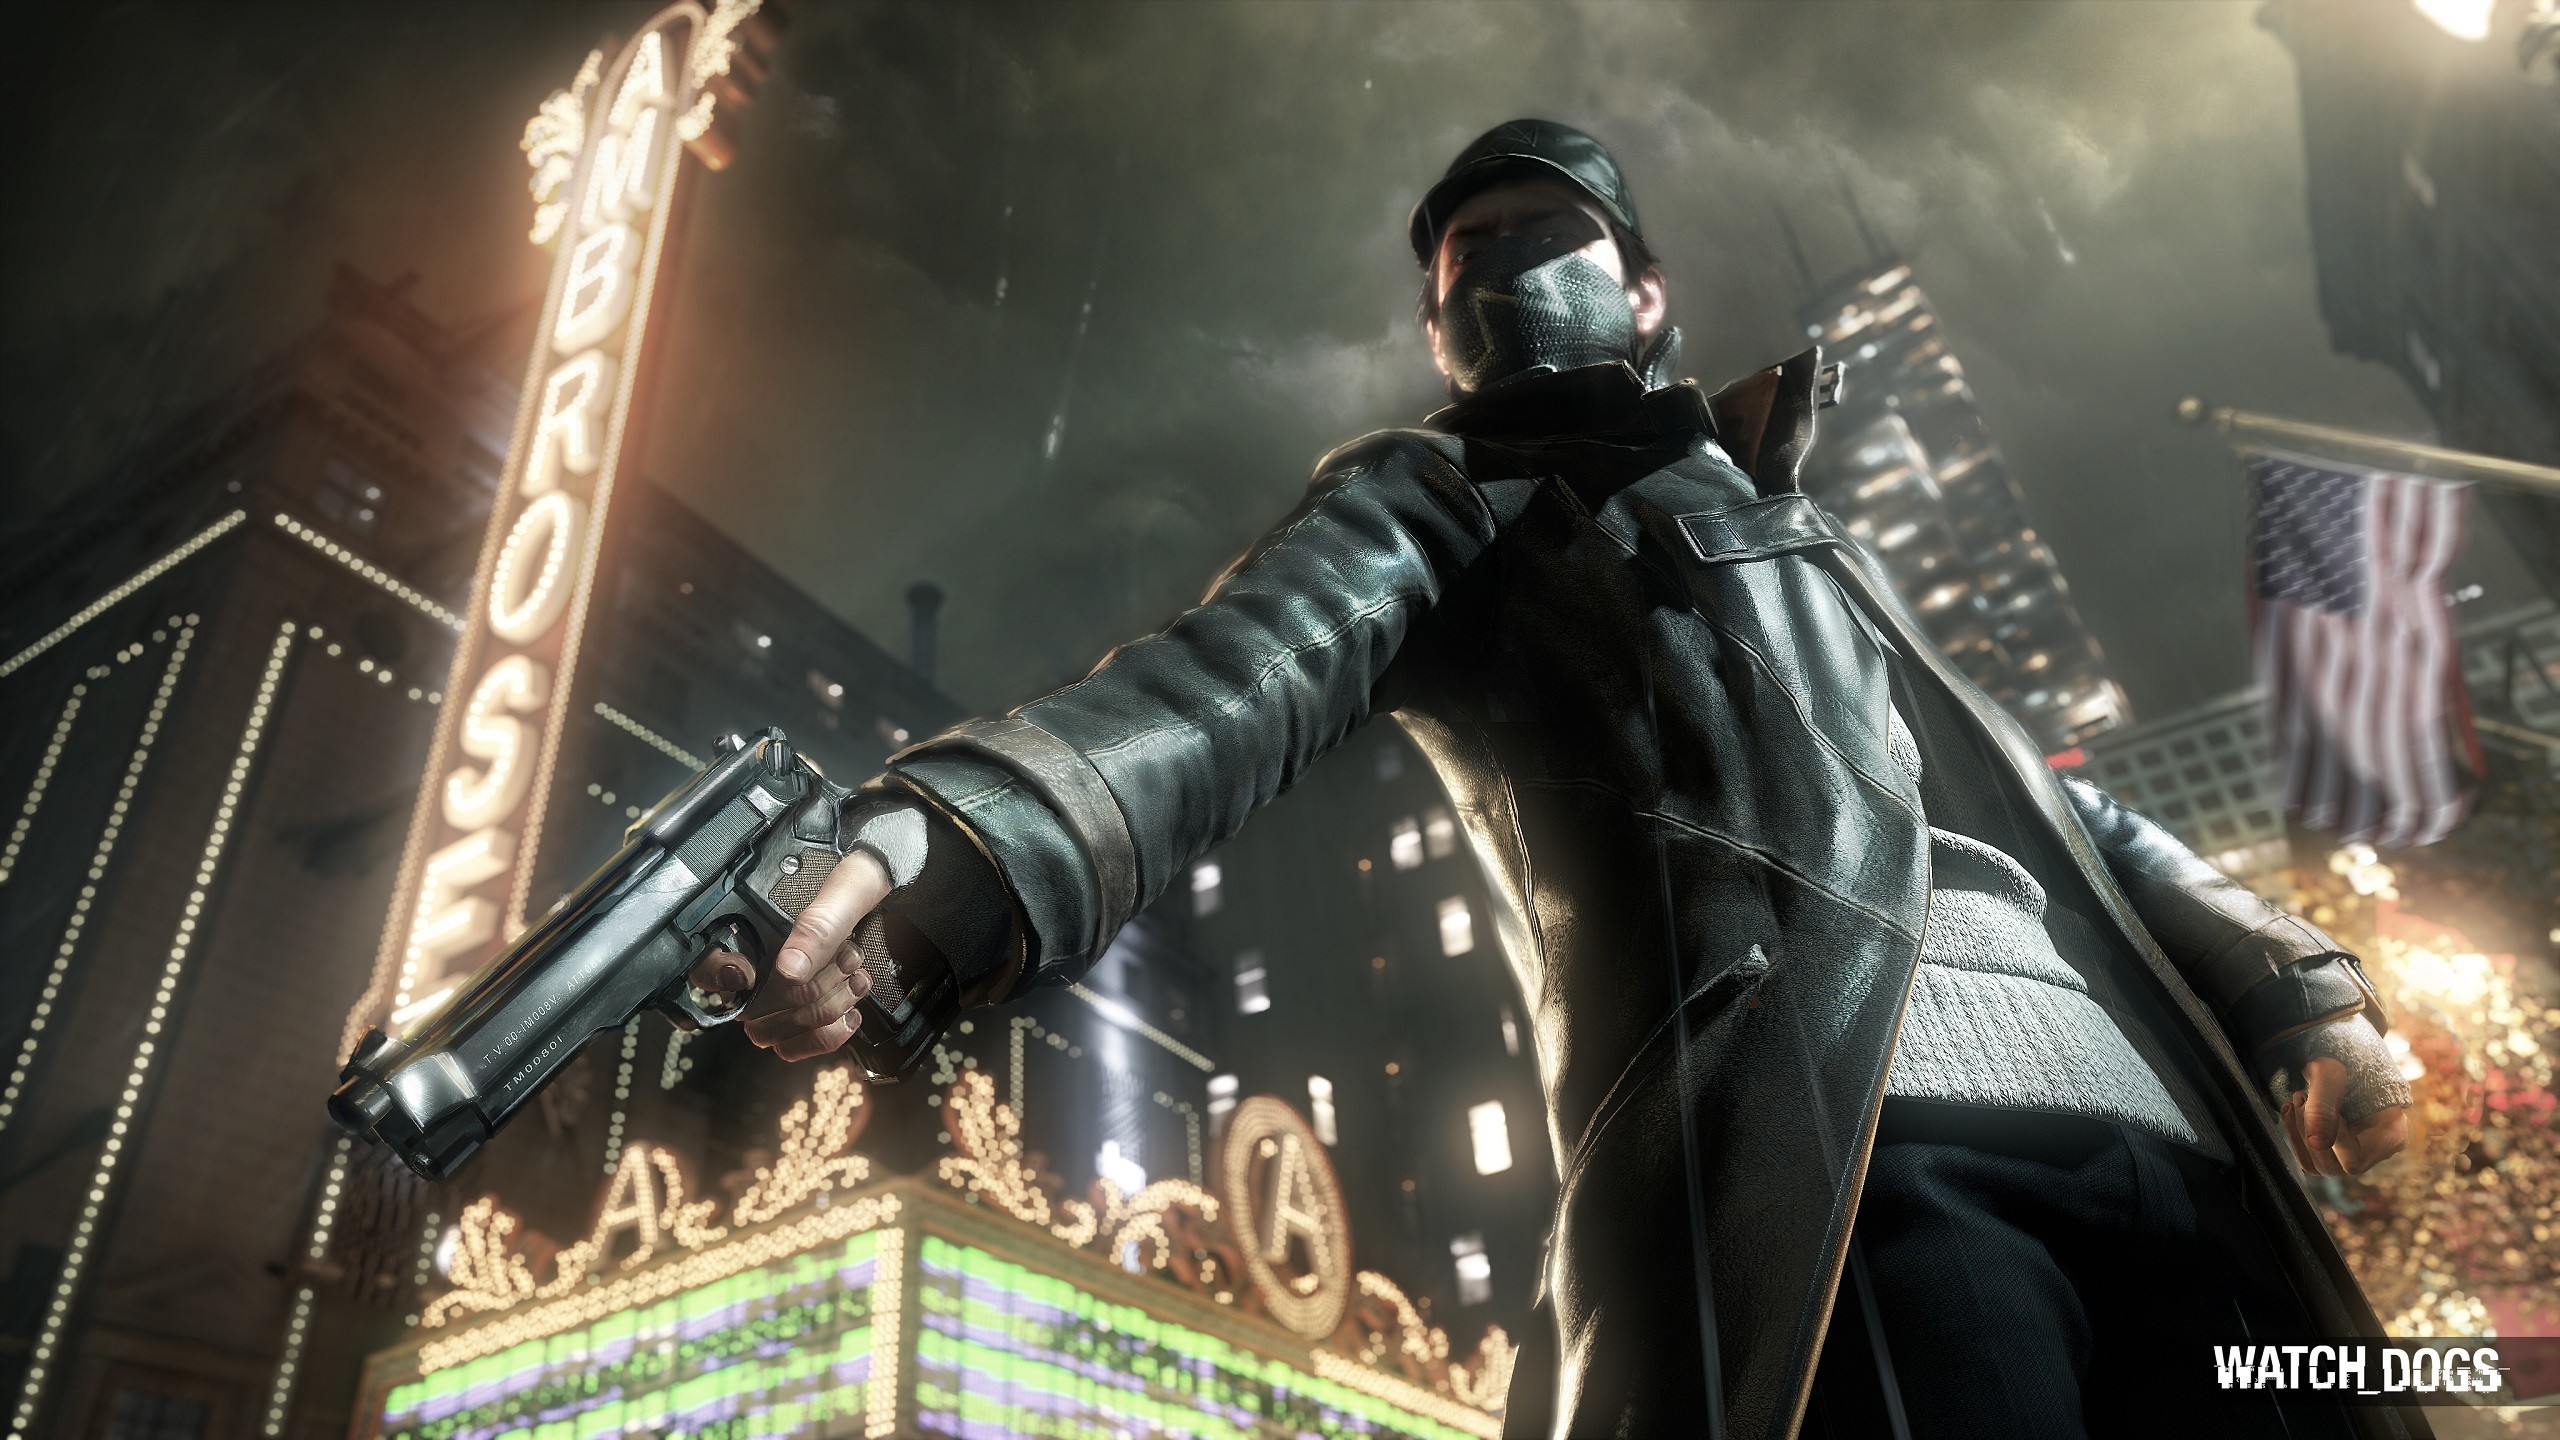 anime, Video Games, Watch Dogs, Ubisoft, Aiden Pearce Wallpaper